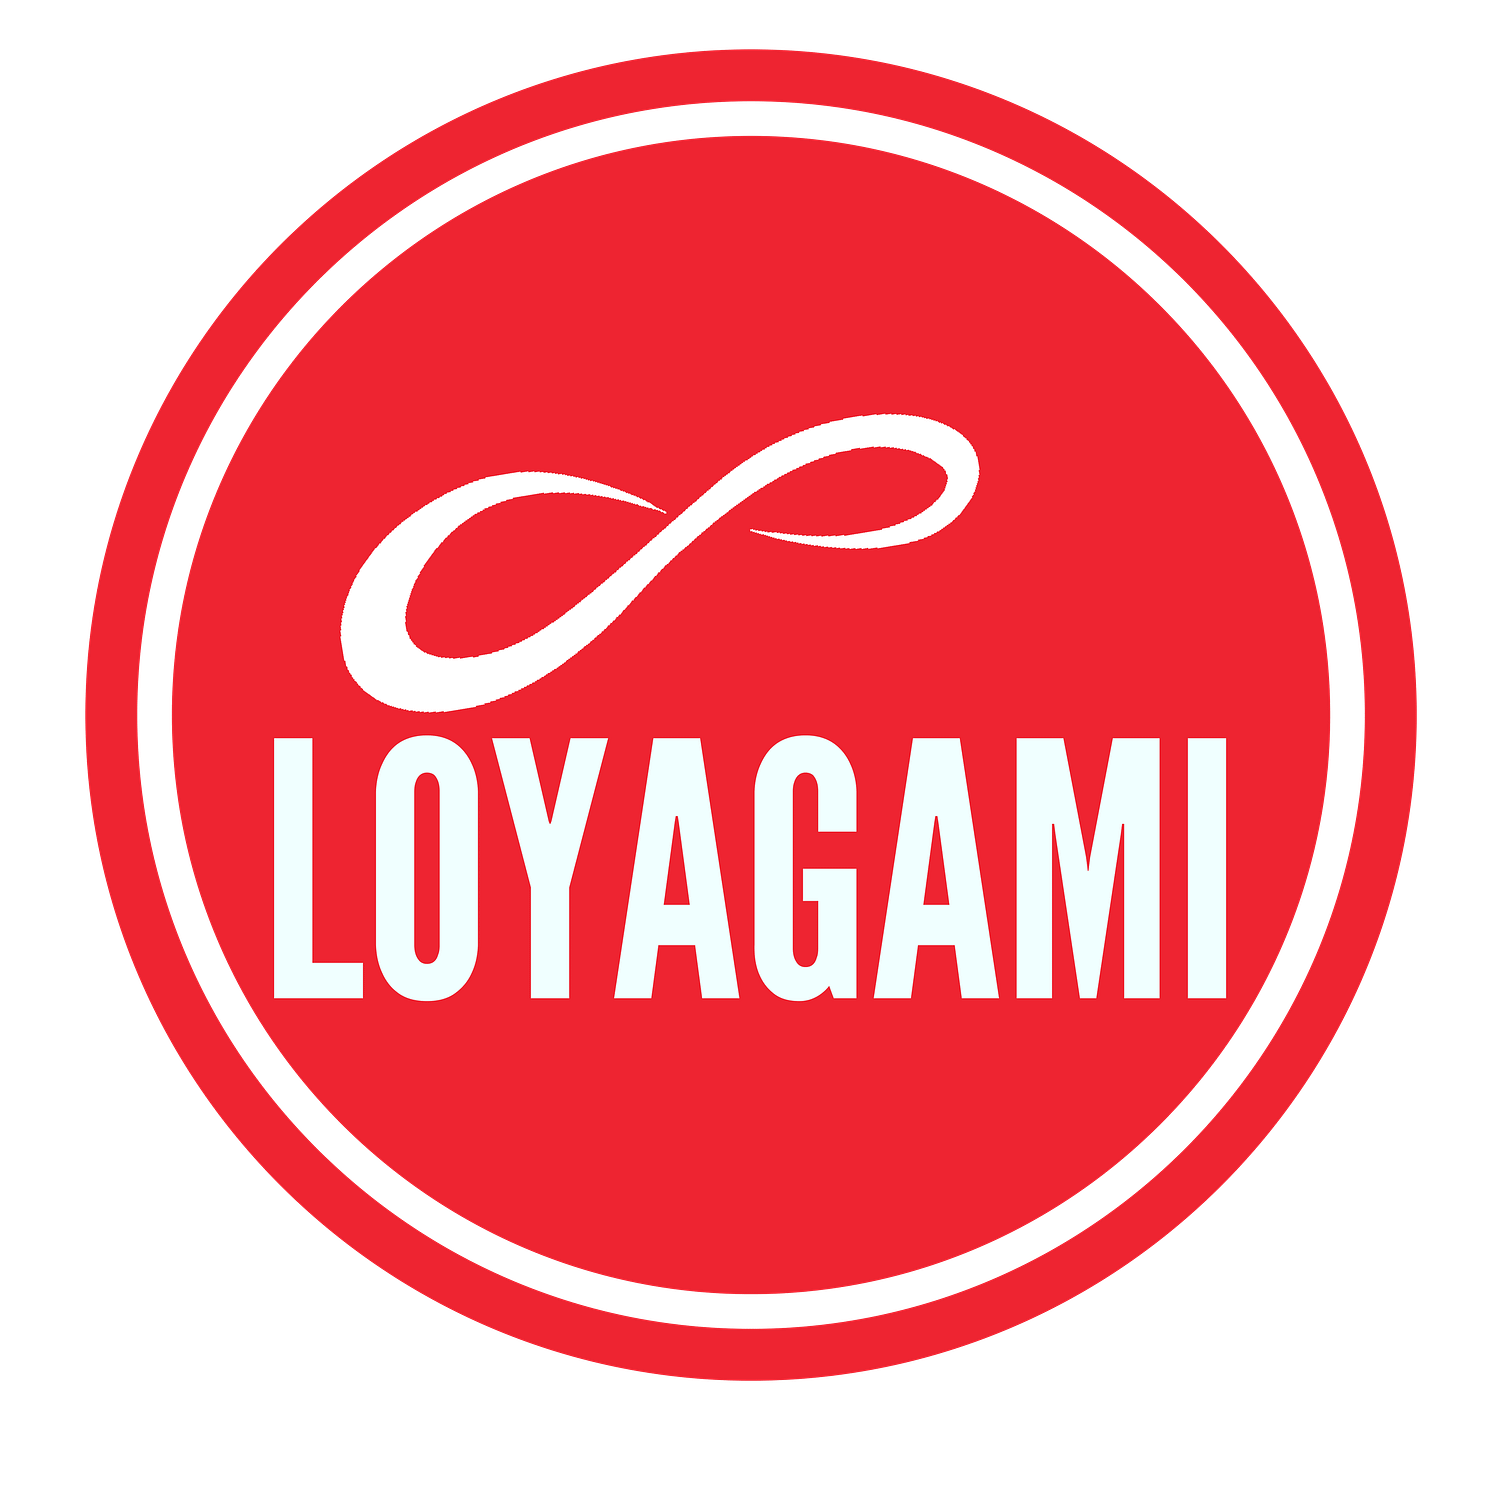 Loyagami Indonesia | Real Asset Based Business Investment